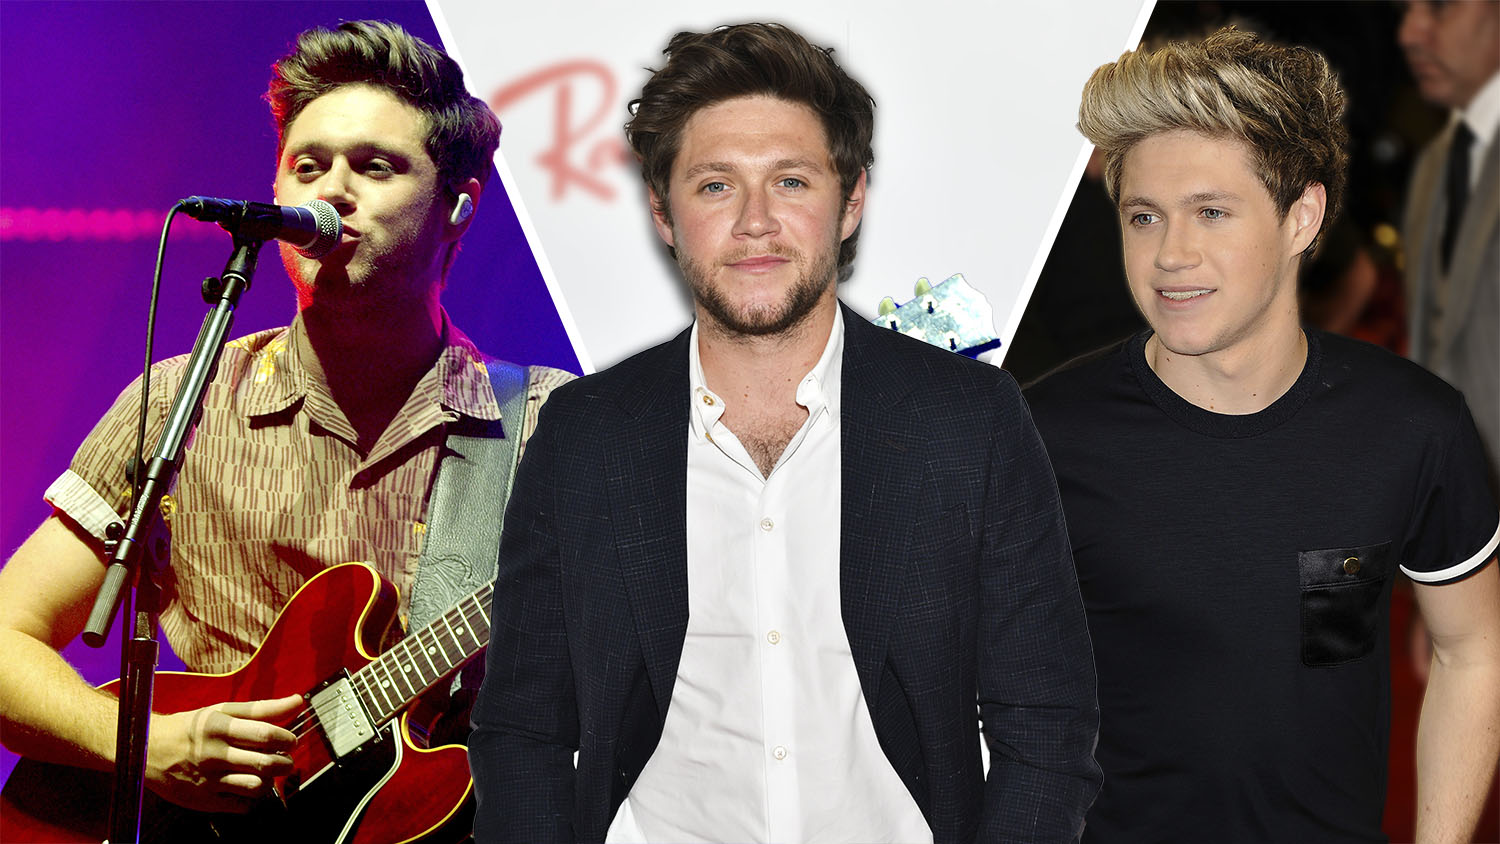 Niall Horan: Facts you never knew about the One Direction star